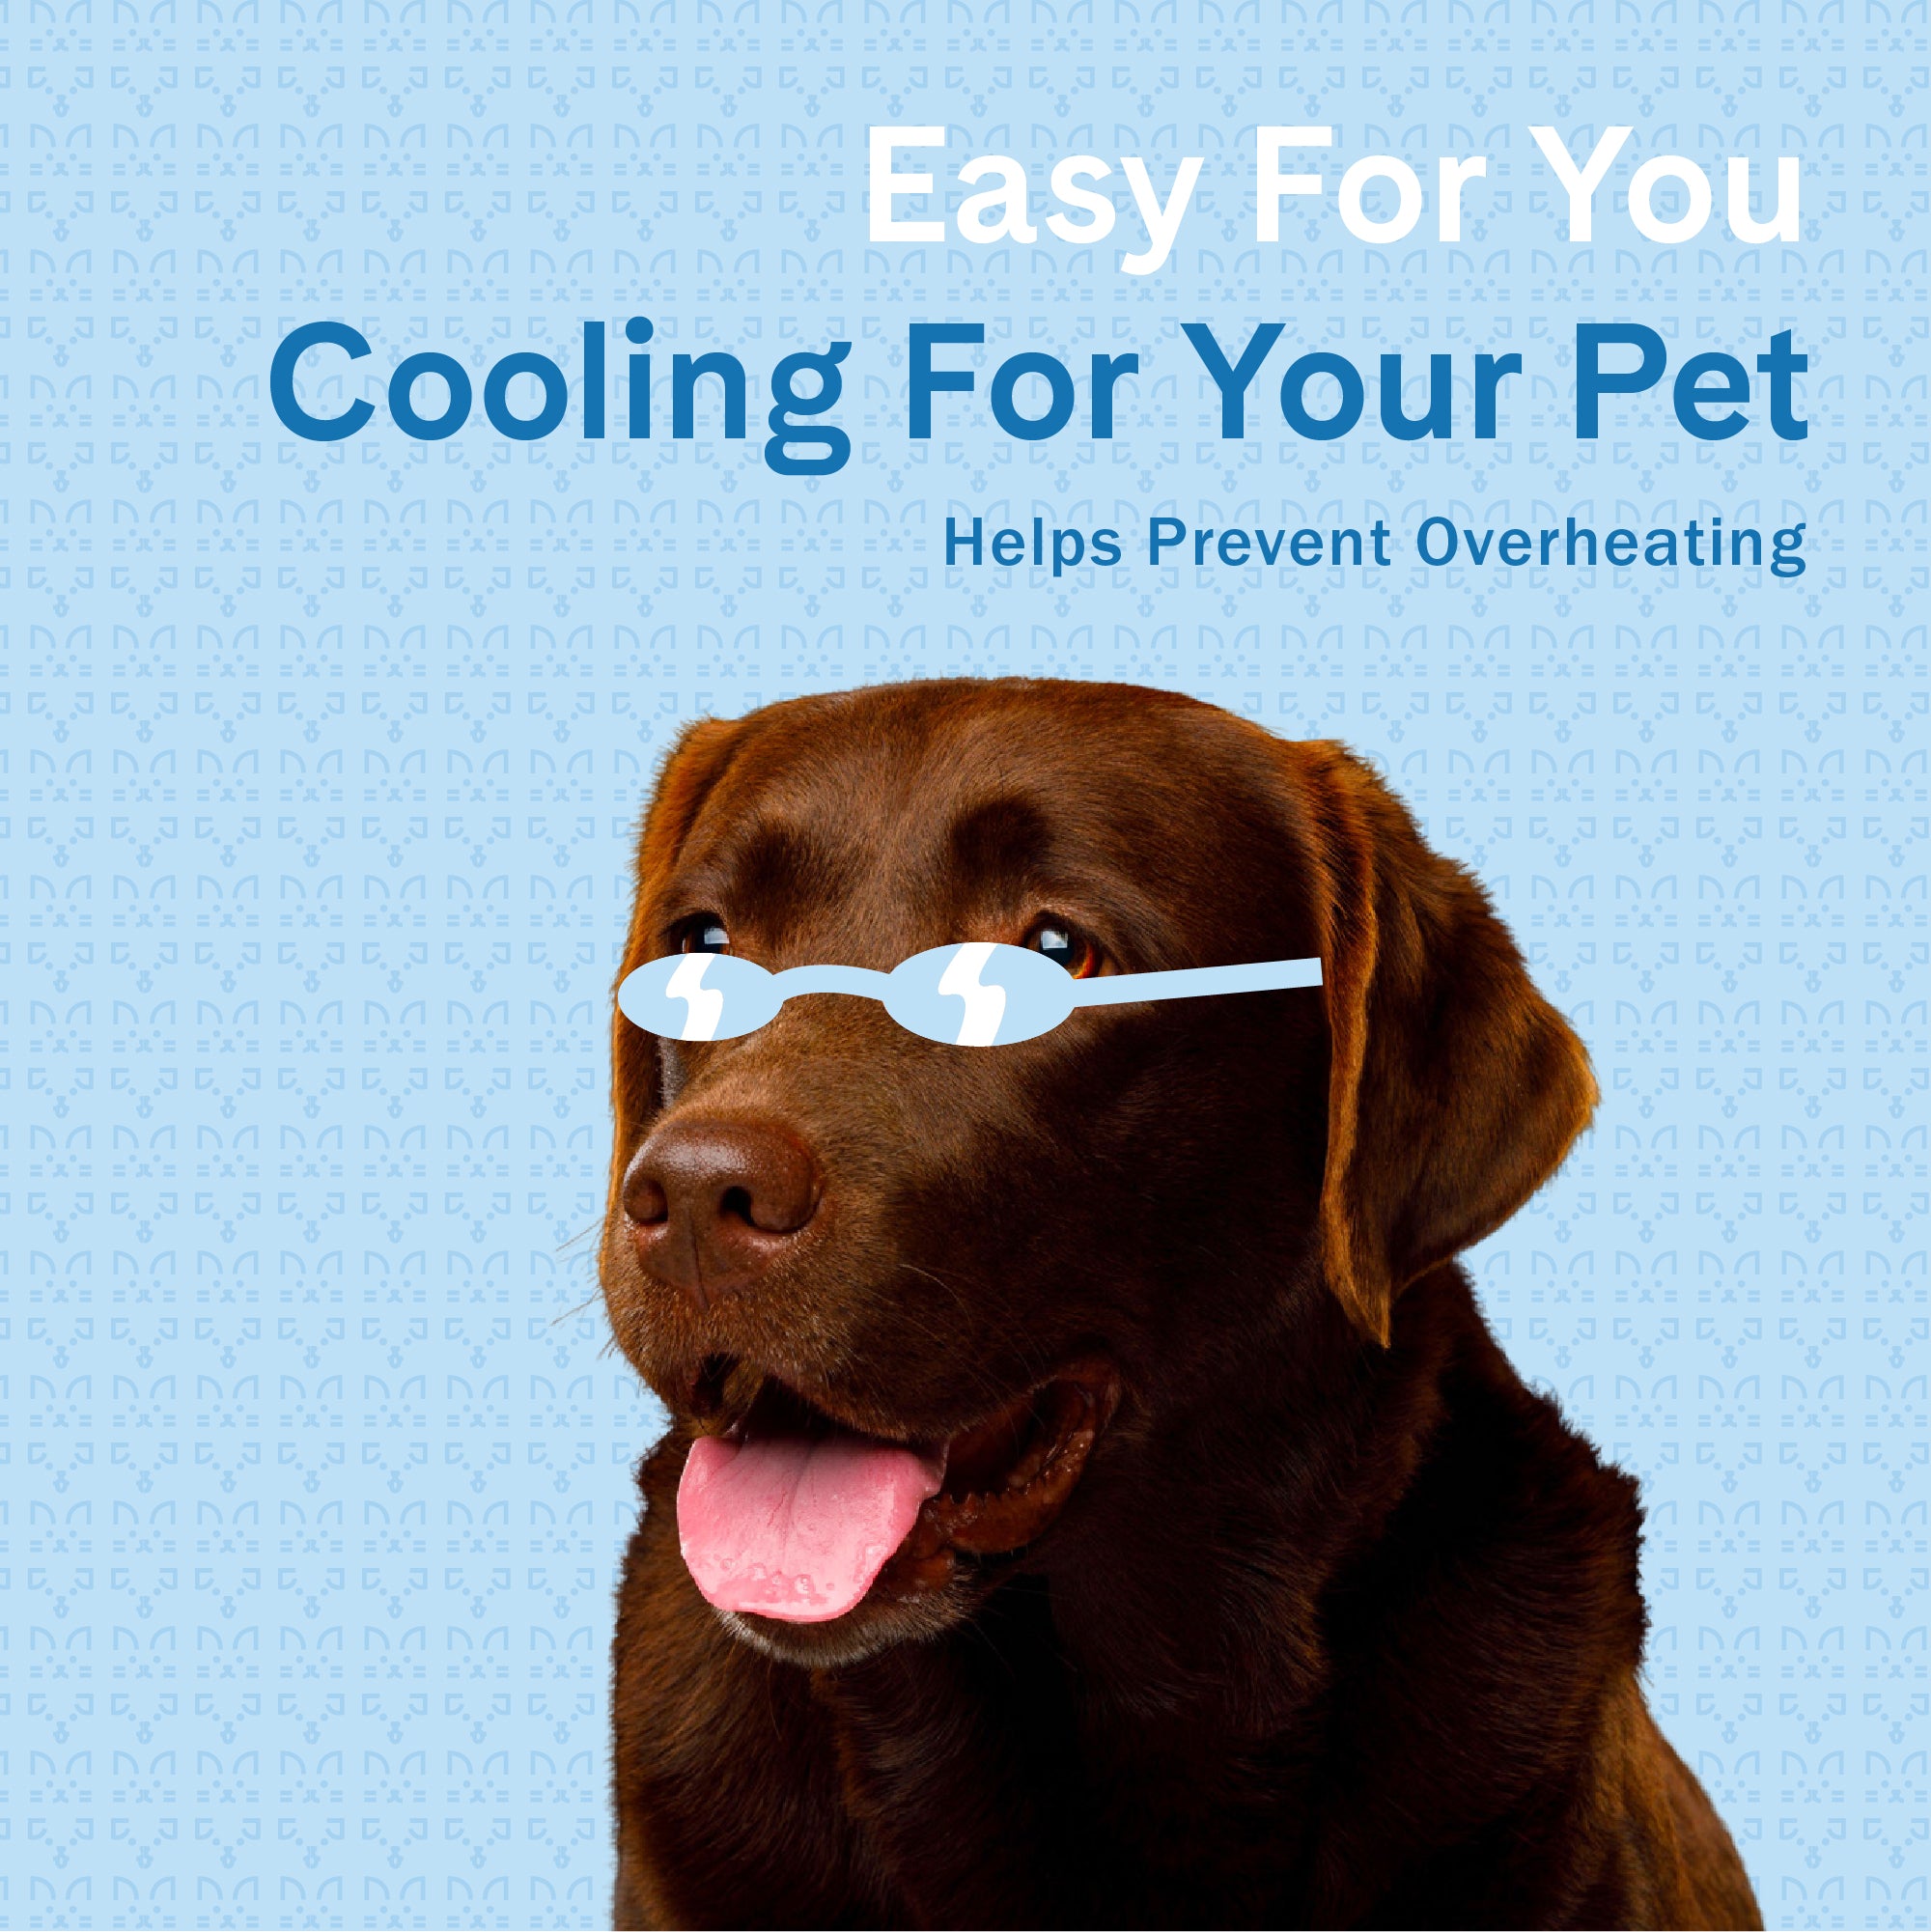 The Green Pet Shop Dog Cooling Mat， Medium - Pressure-Activated Gel Dog Cooling Pad - This Pet Cooling Mat Keeps Dogs and Cats Comfortable， Avoid Overheating - Ideal for 21 - 45 Lb. Dogs